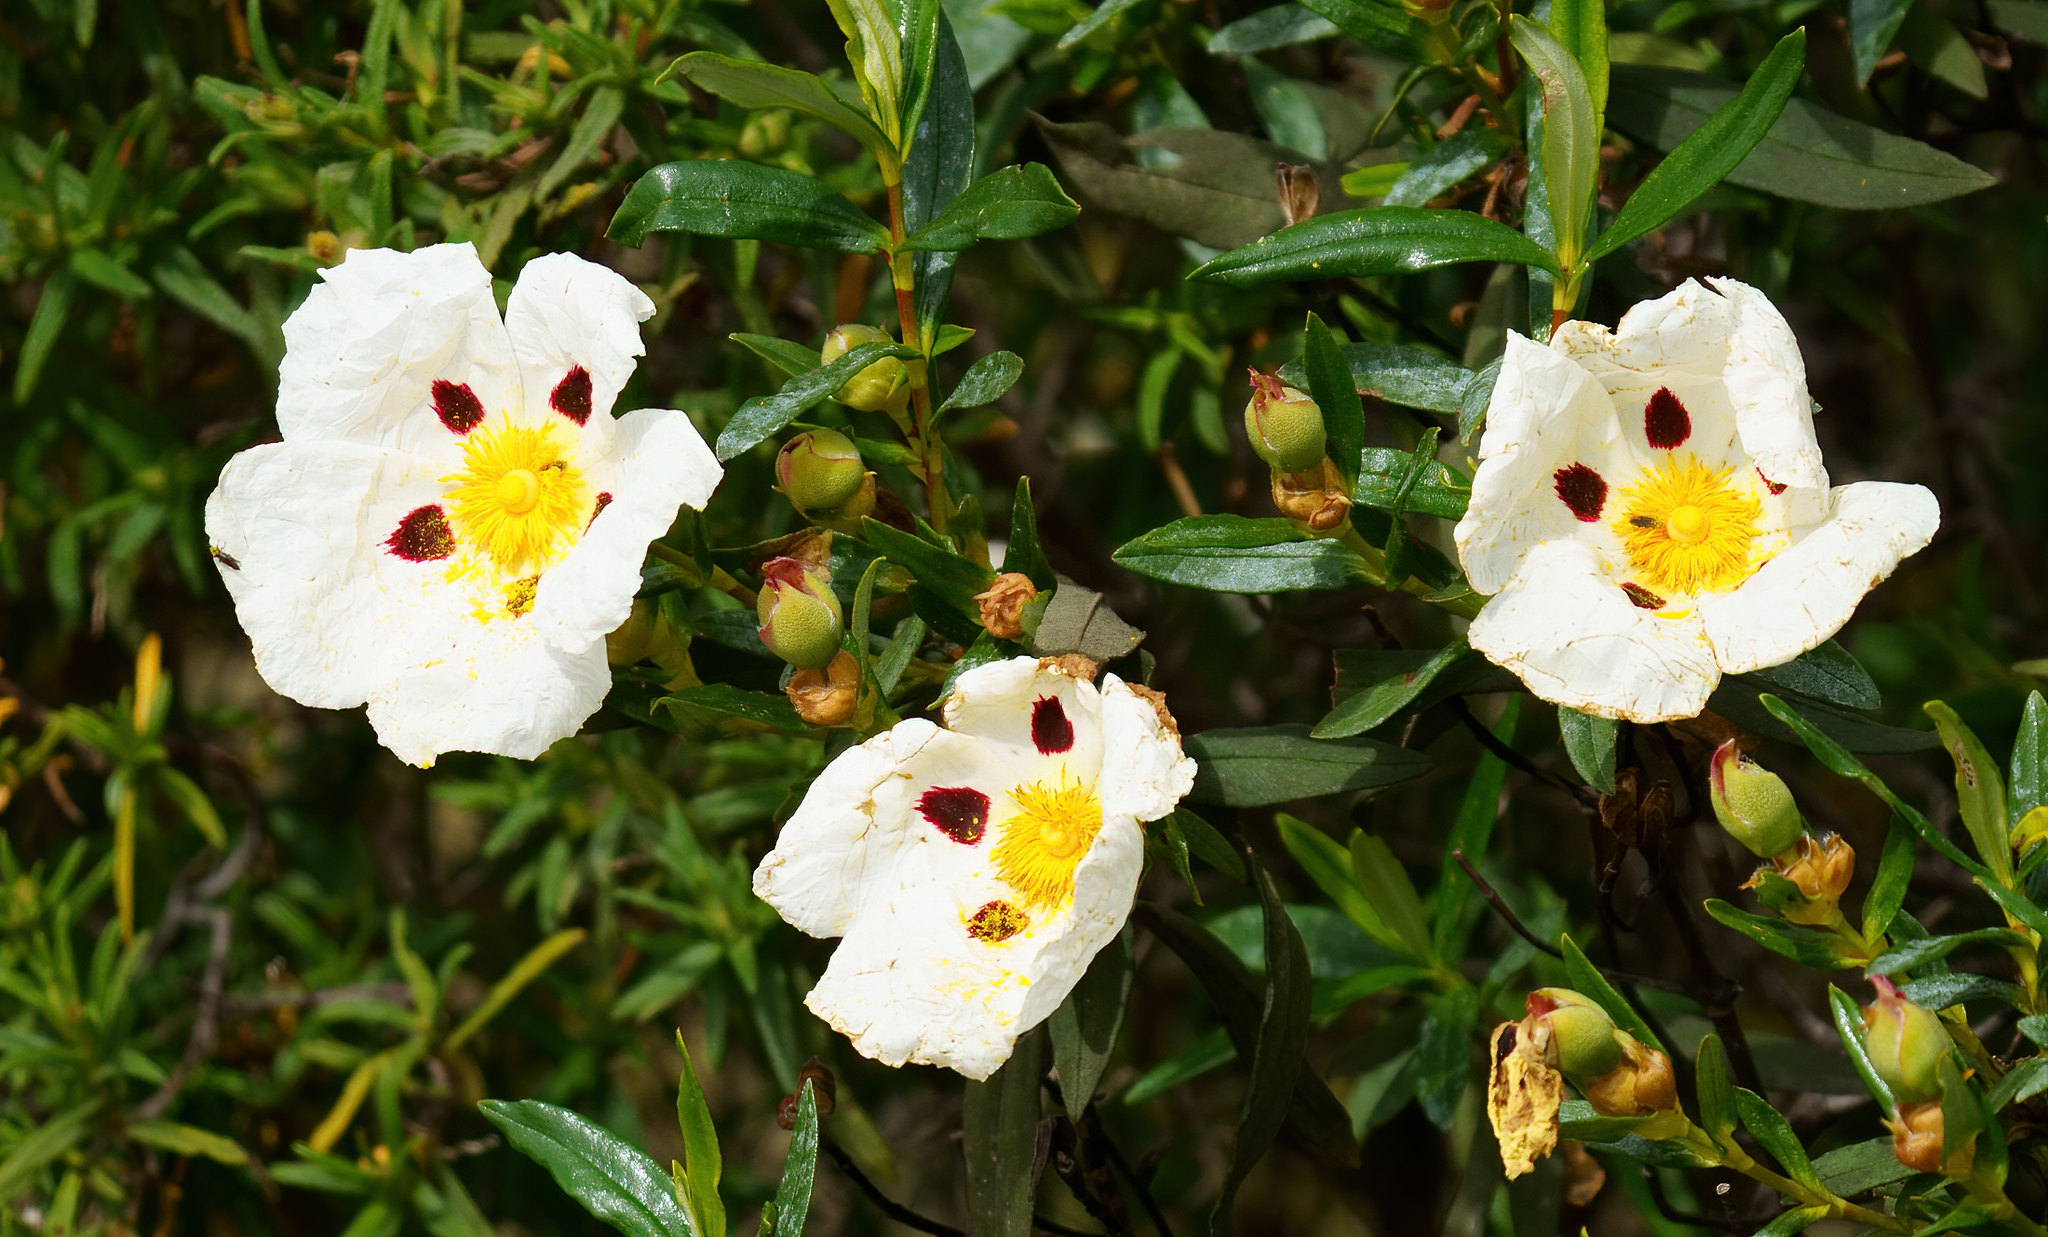 Gum Rock Rose - this was everywhere in the Mertola area